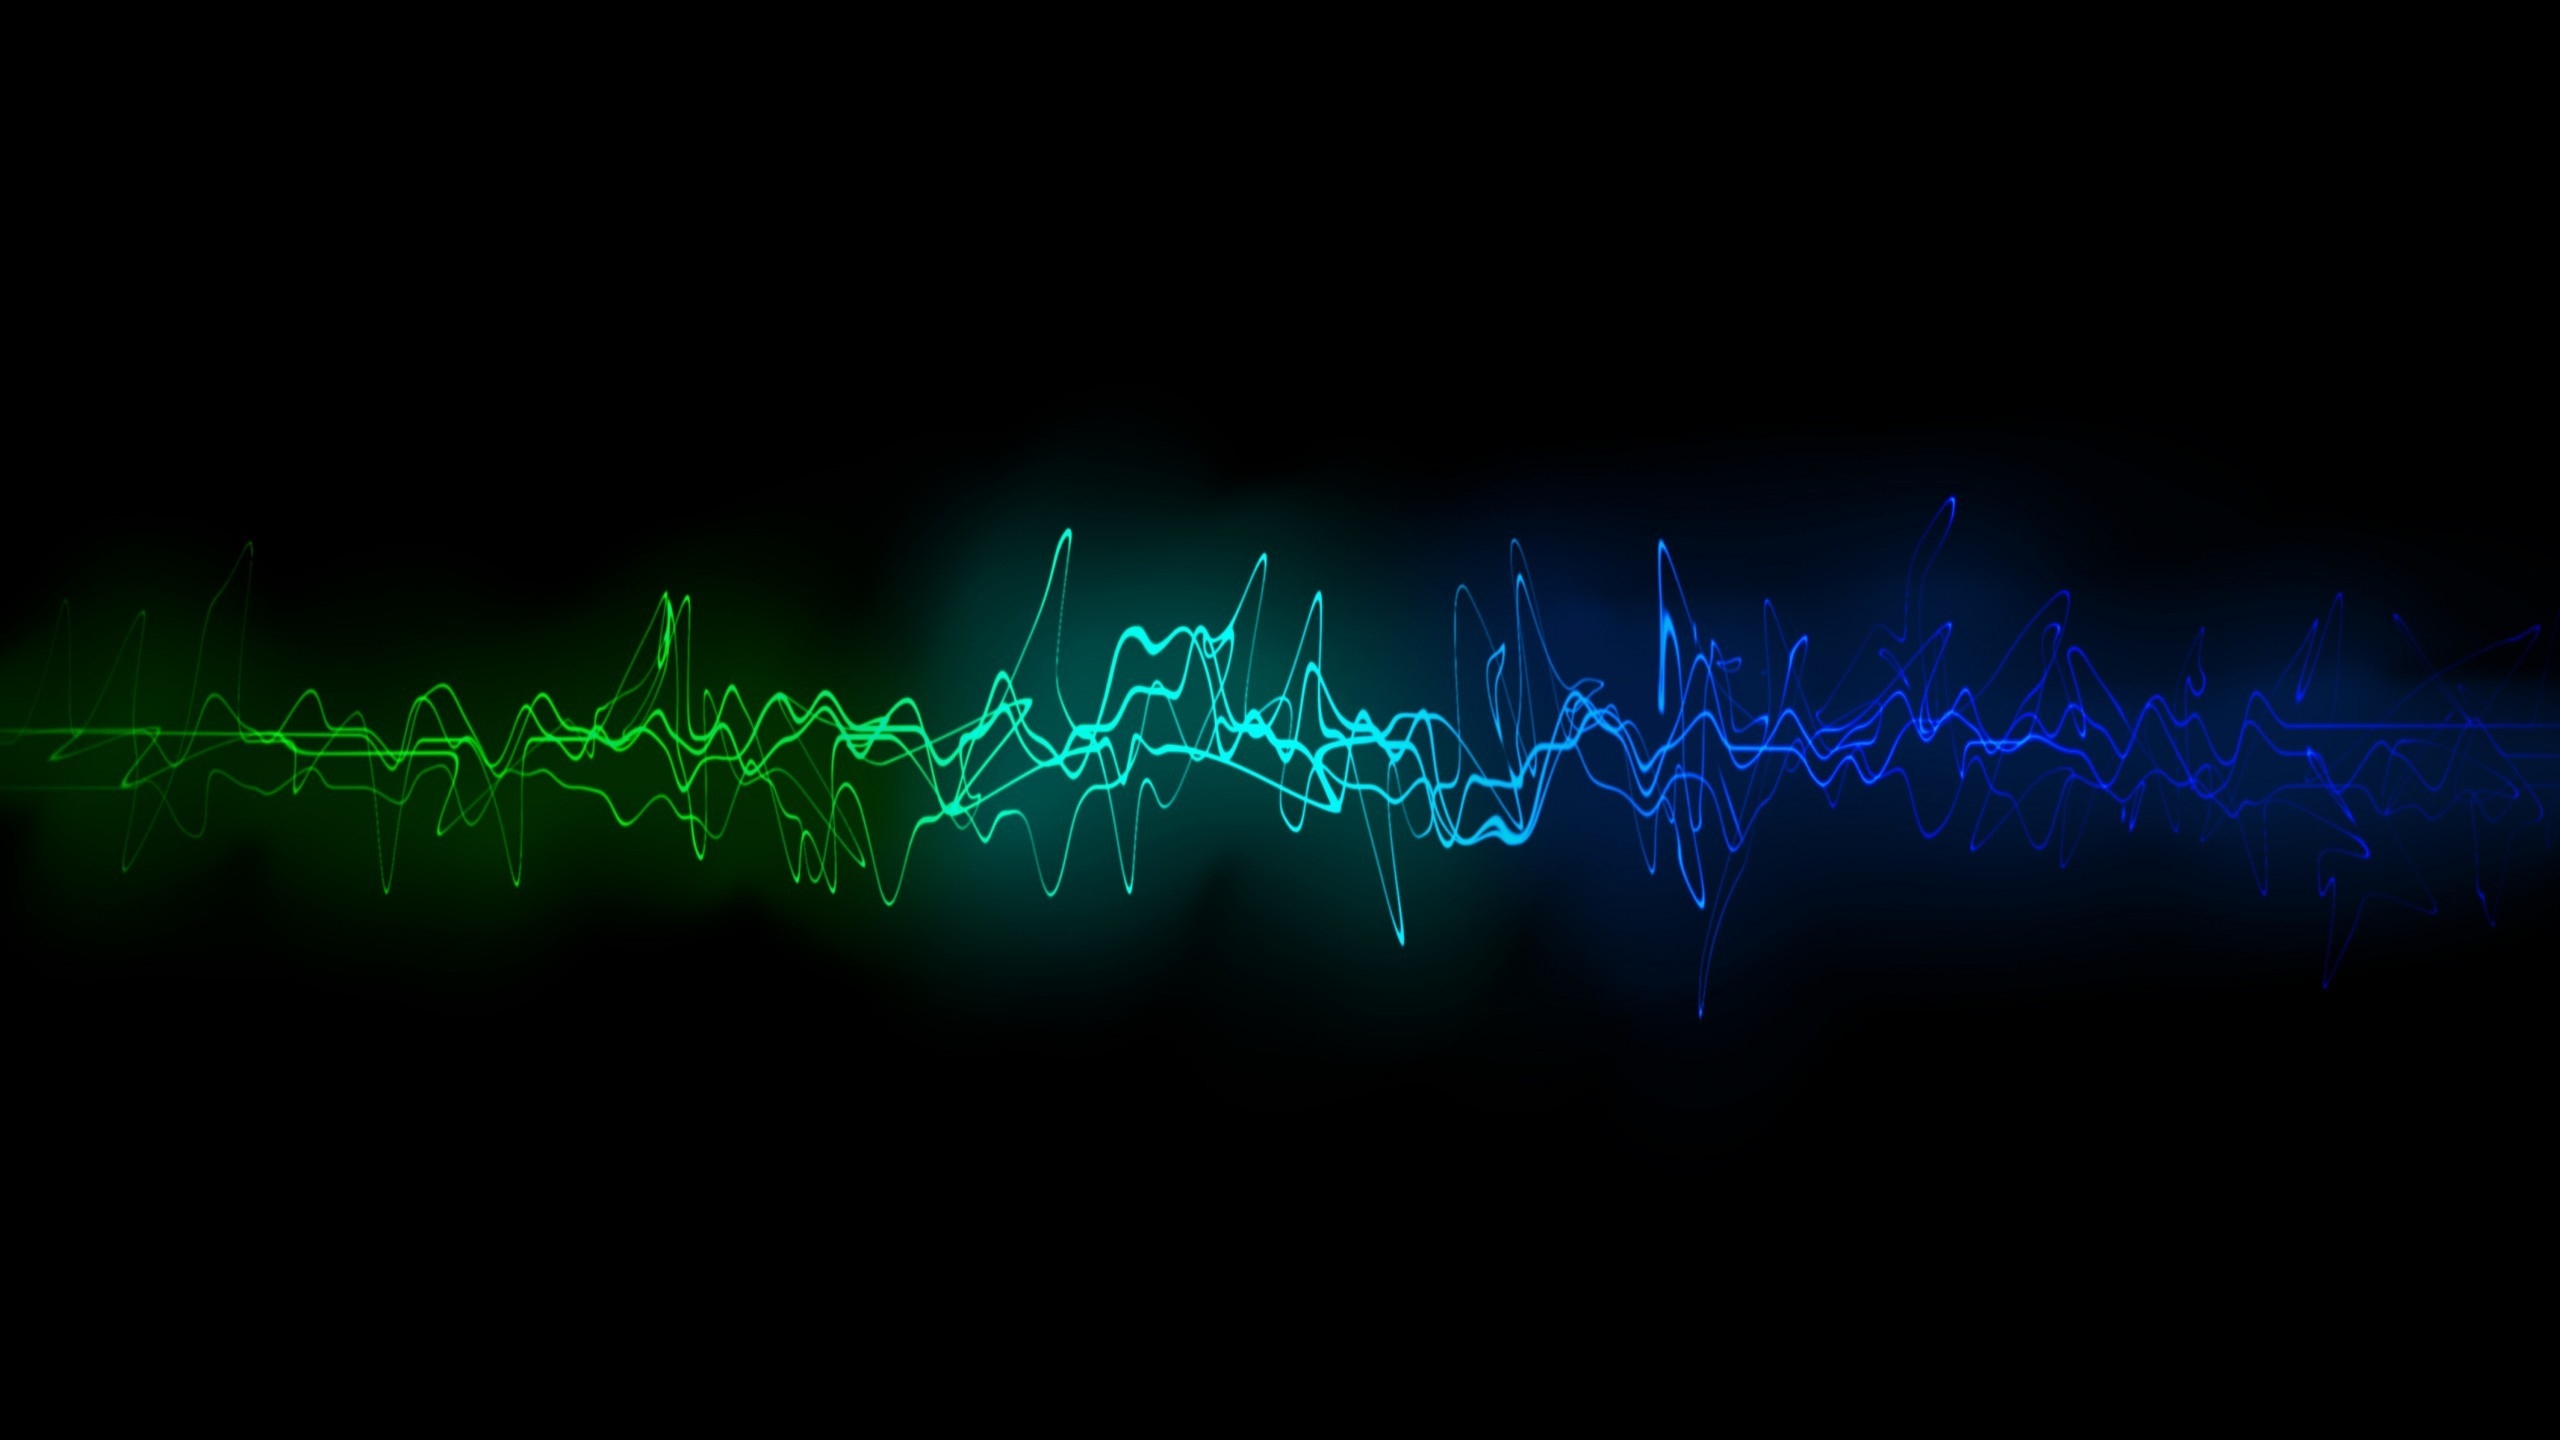 Cool Sound Waves for 2560x1440 HDTV resolution